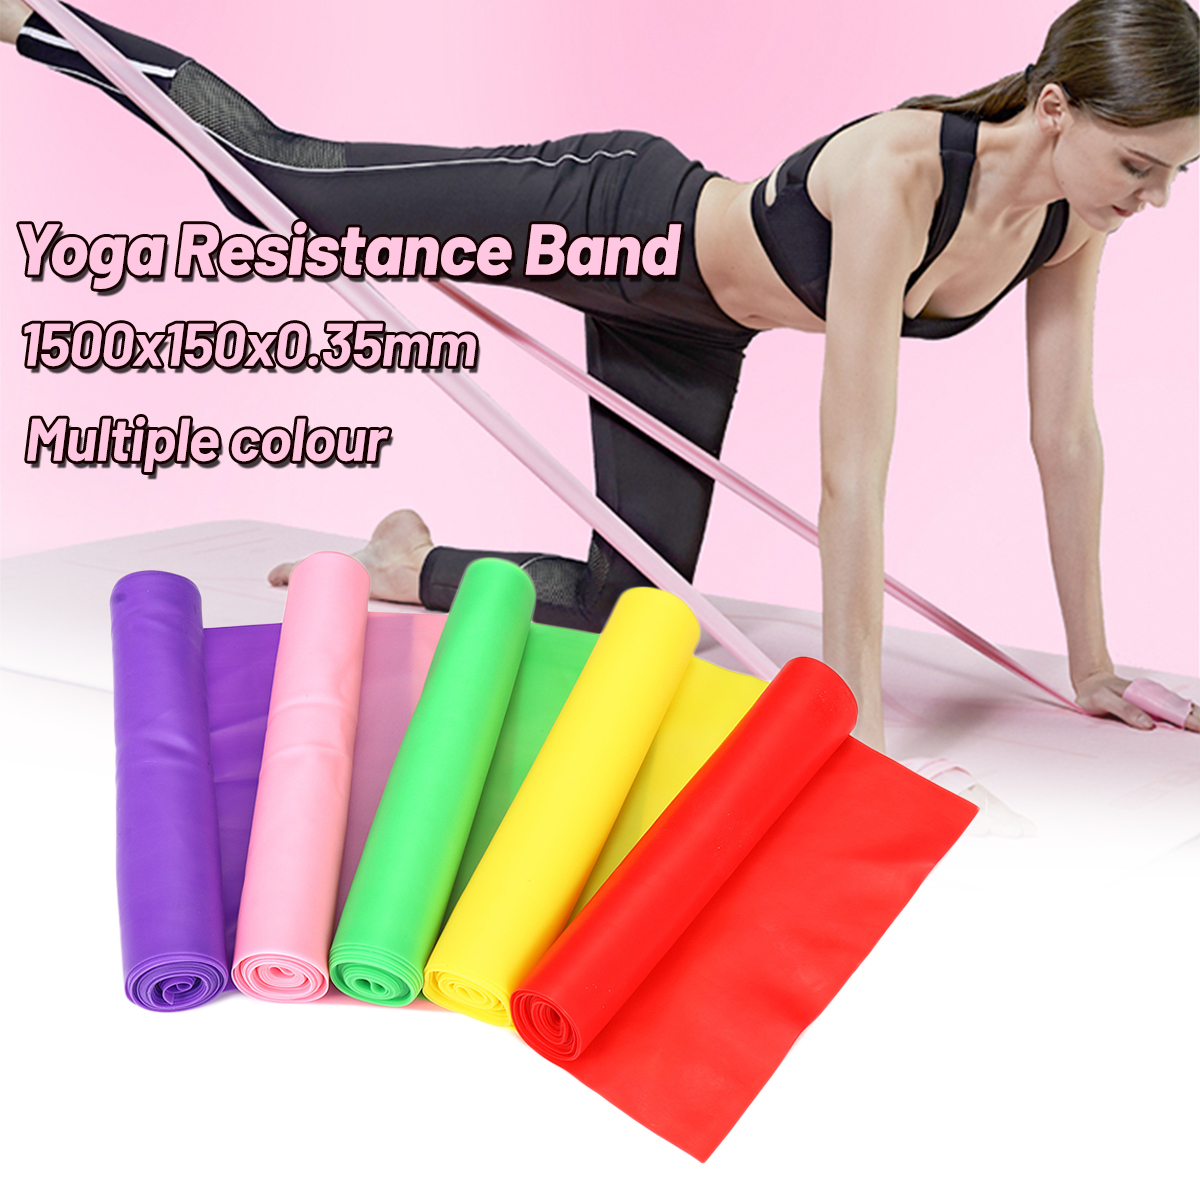 15m-Elastic-Yoga-Pilates-Stretch-Resistance-Bands-Strap-Exercise-Home-Workout-GYM-035mm-Thickness-1673779-2